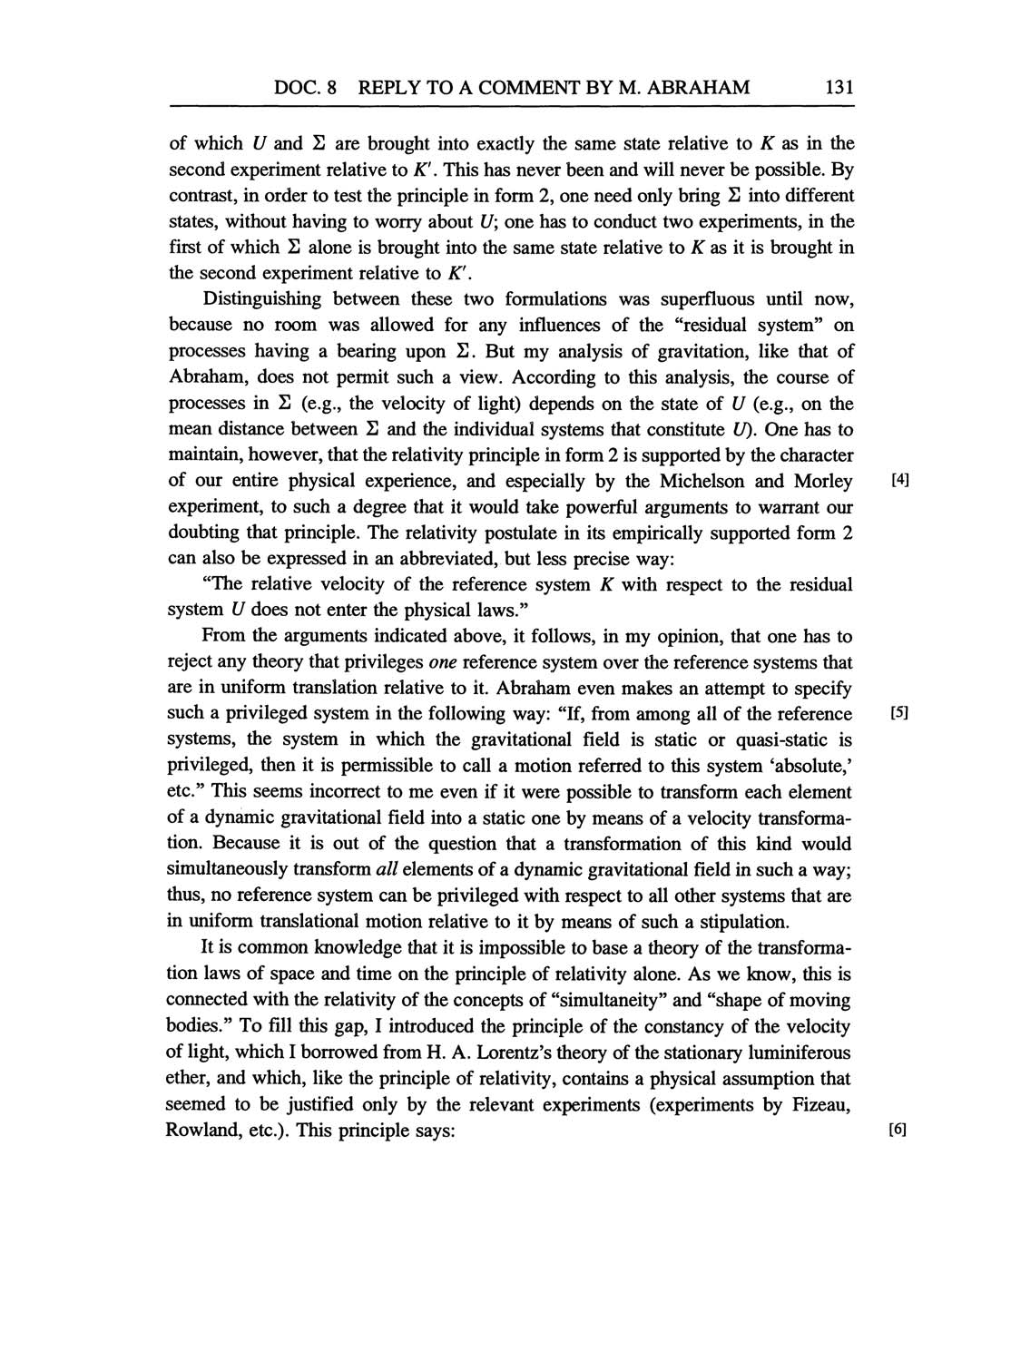 Volume 4: The Swiss Years: Writings 1912-1914 (English translation supplement) page 131